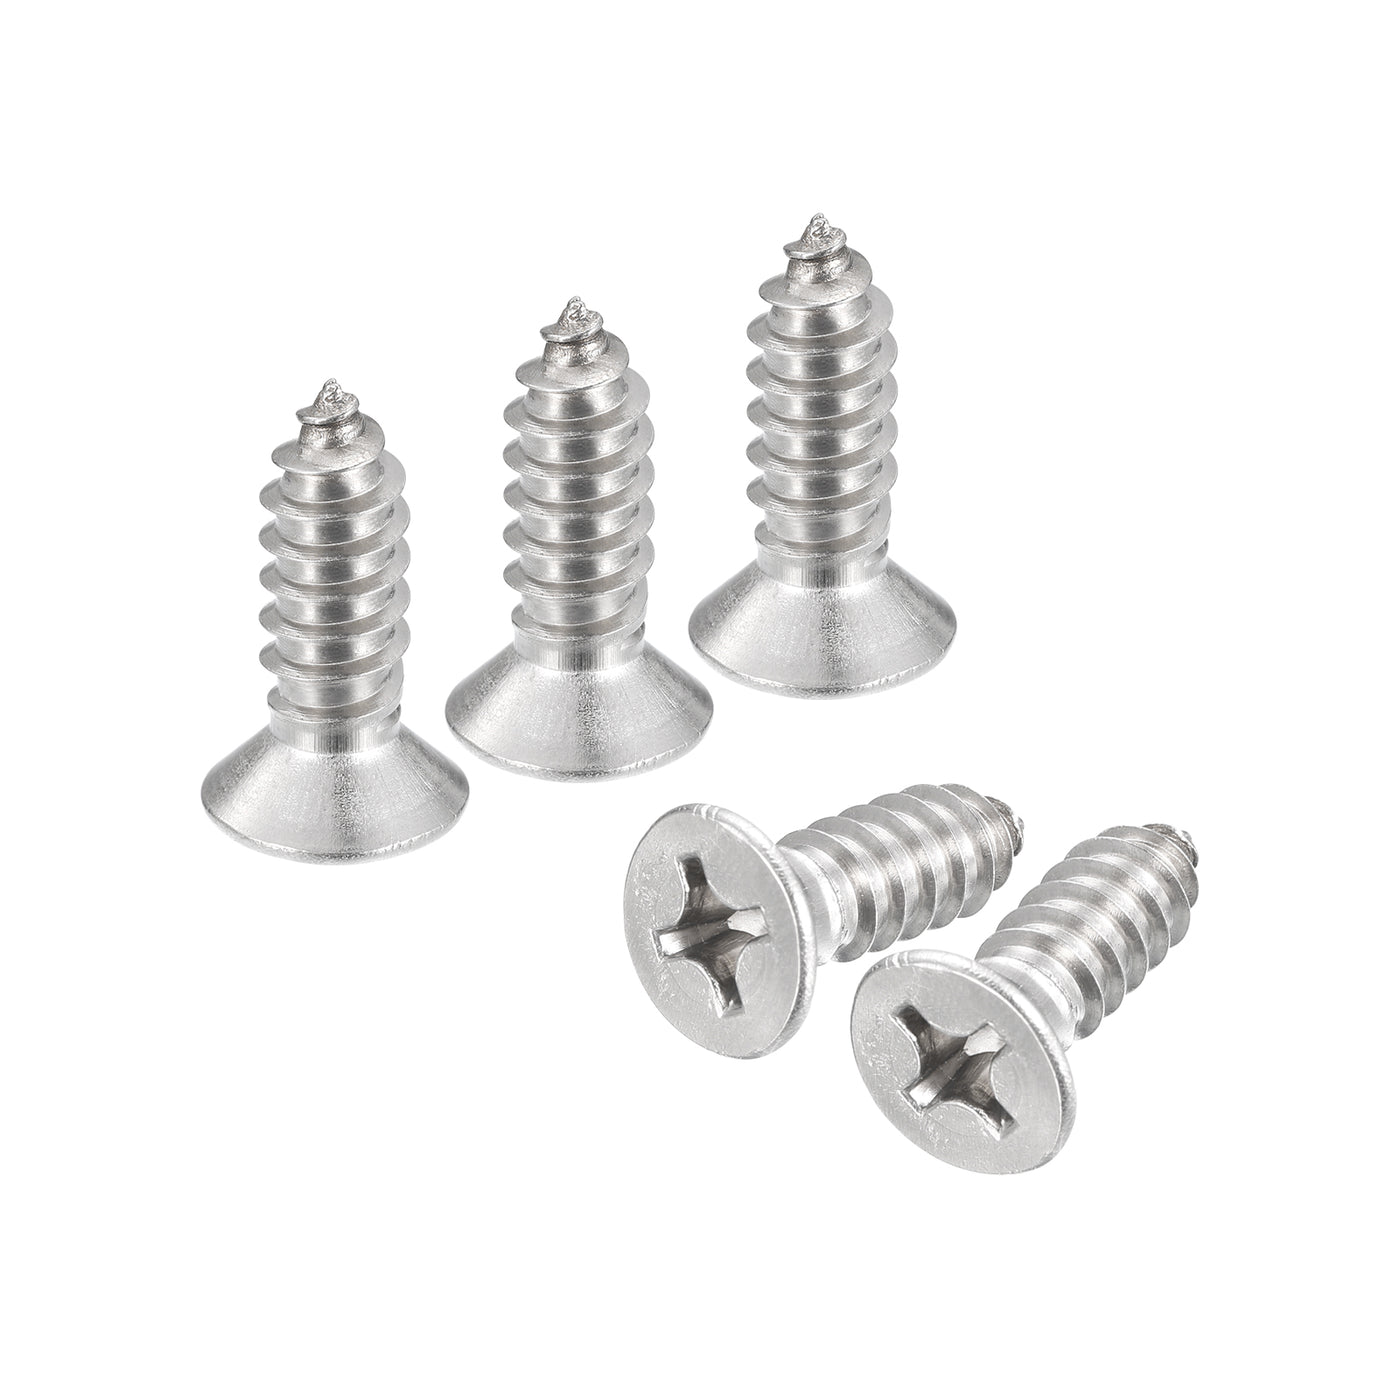 uxcell Uxcell #14x3/4" Wood Screws, 15pcs Phillips Self Tapping Screws 304 Stainless Steel